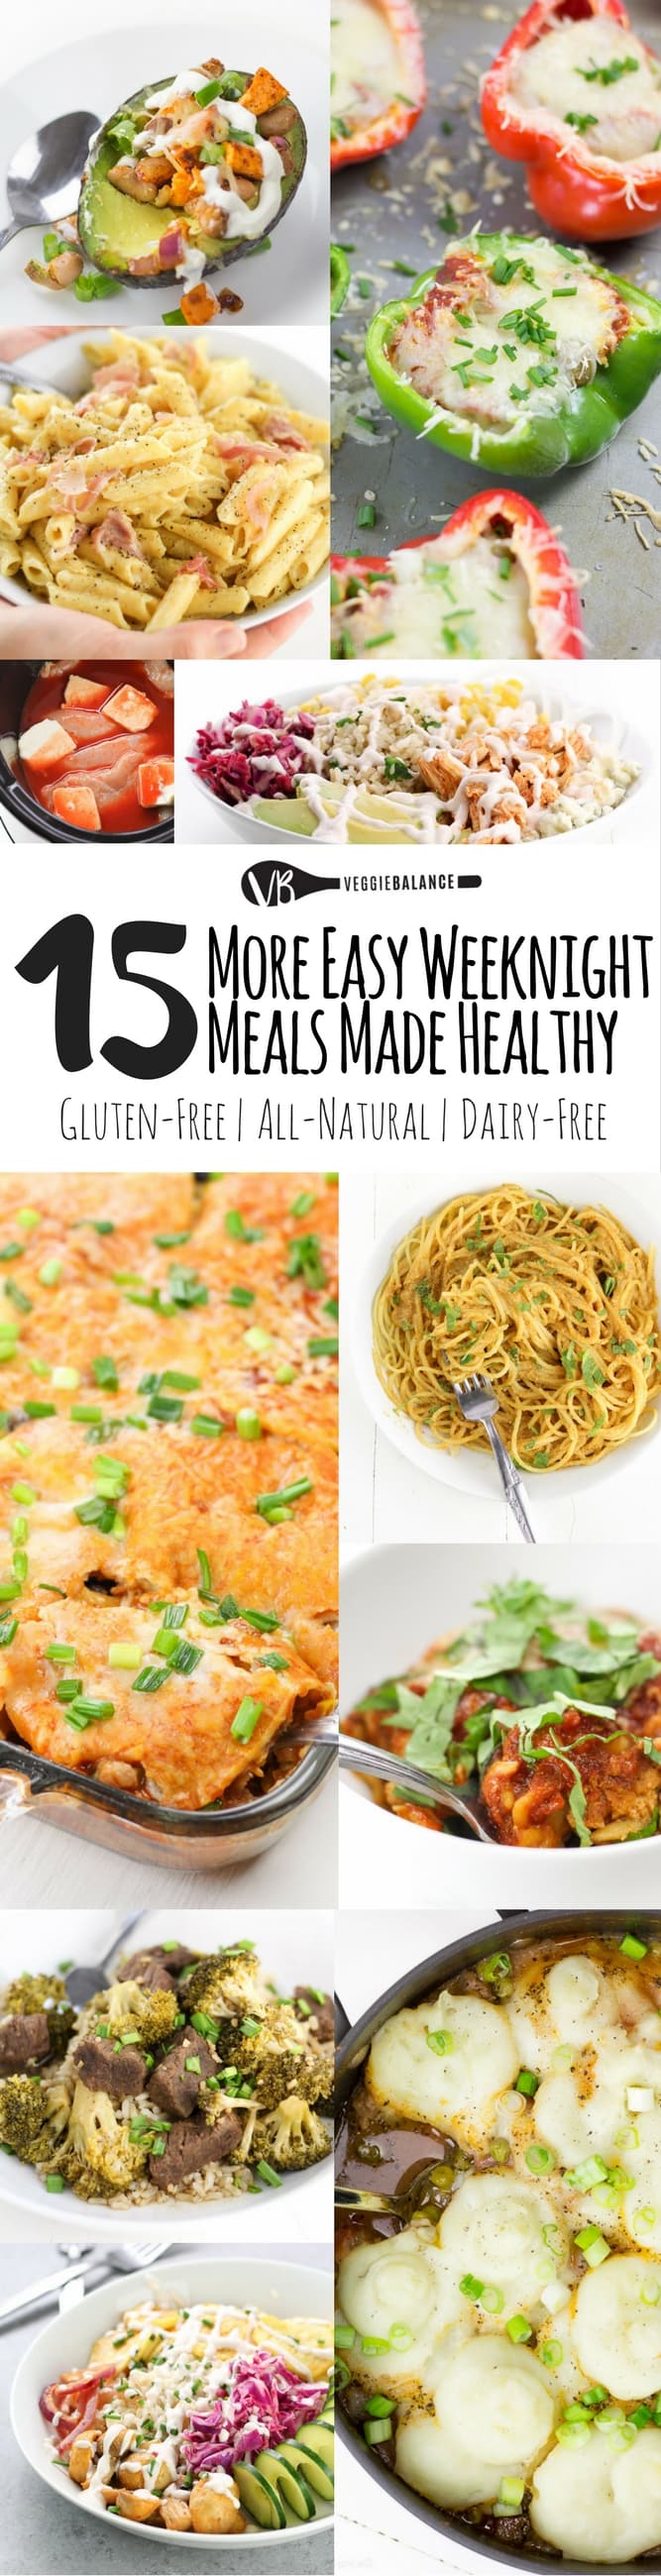 15 More Easy Weeknight Meals - Plant-Based Easy Recipes by Veggie Balance